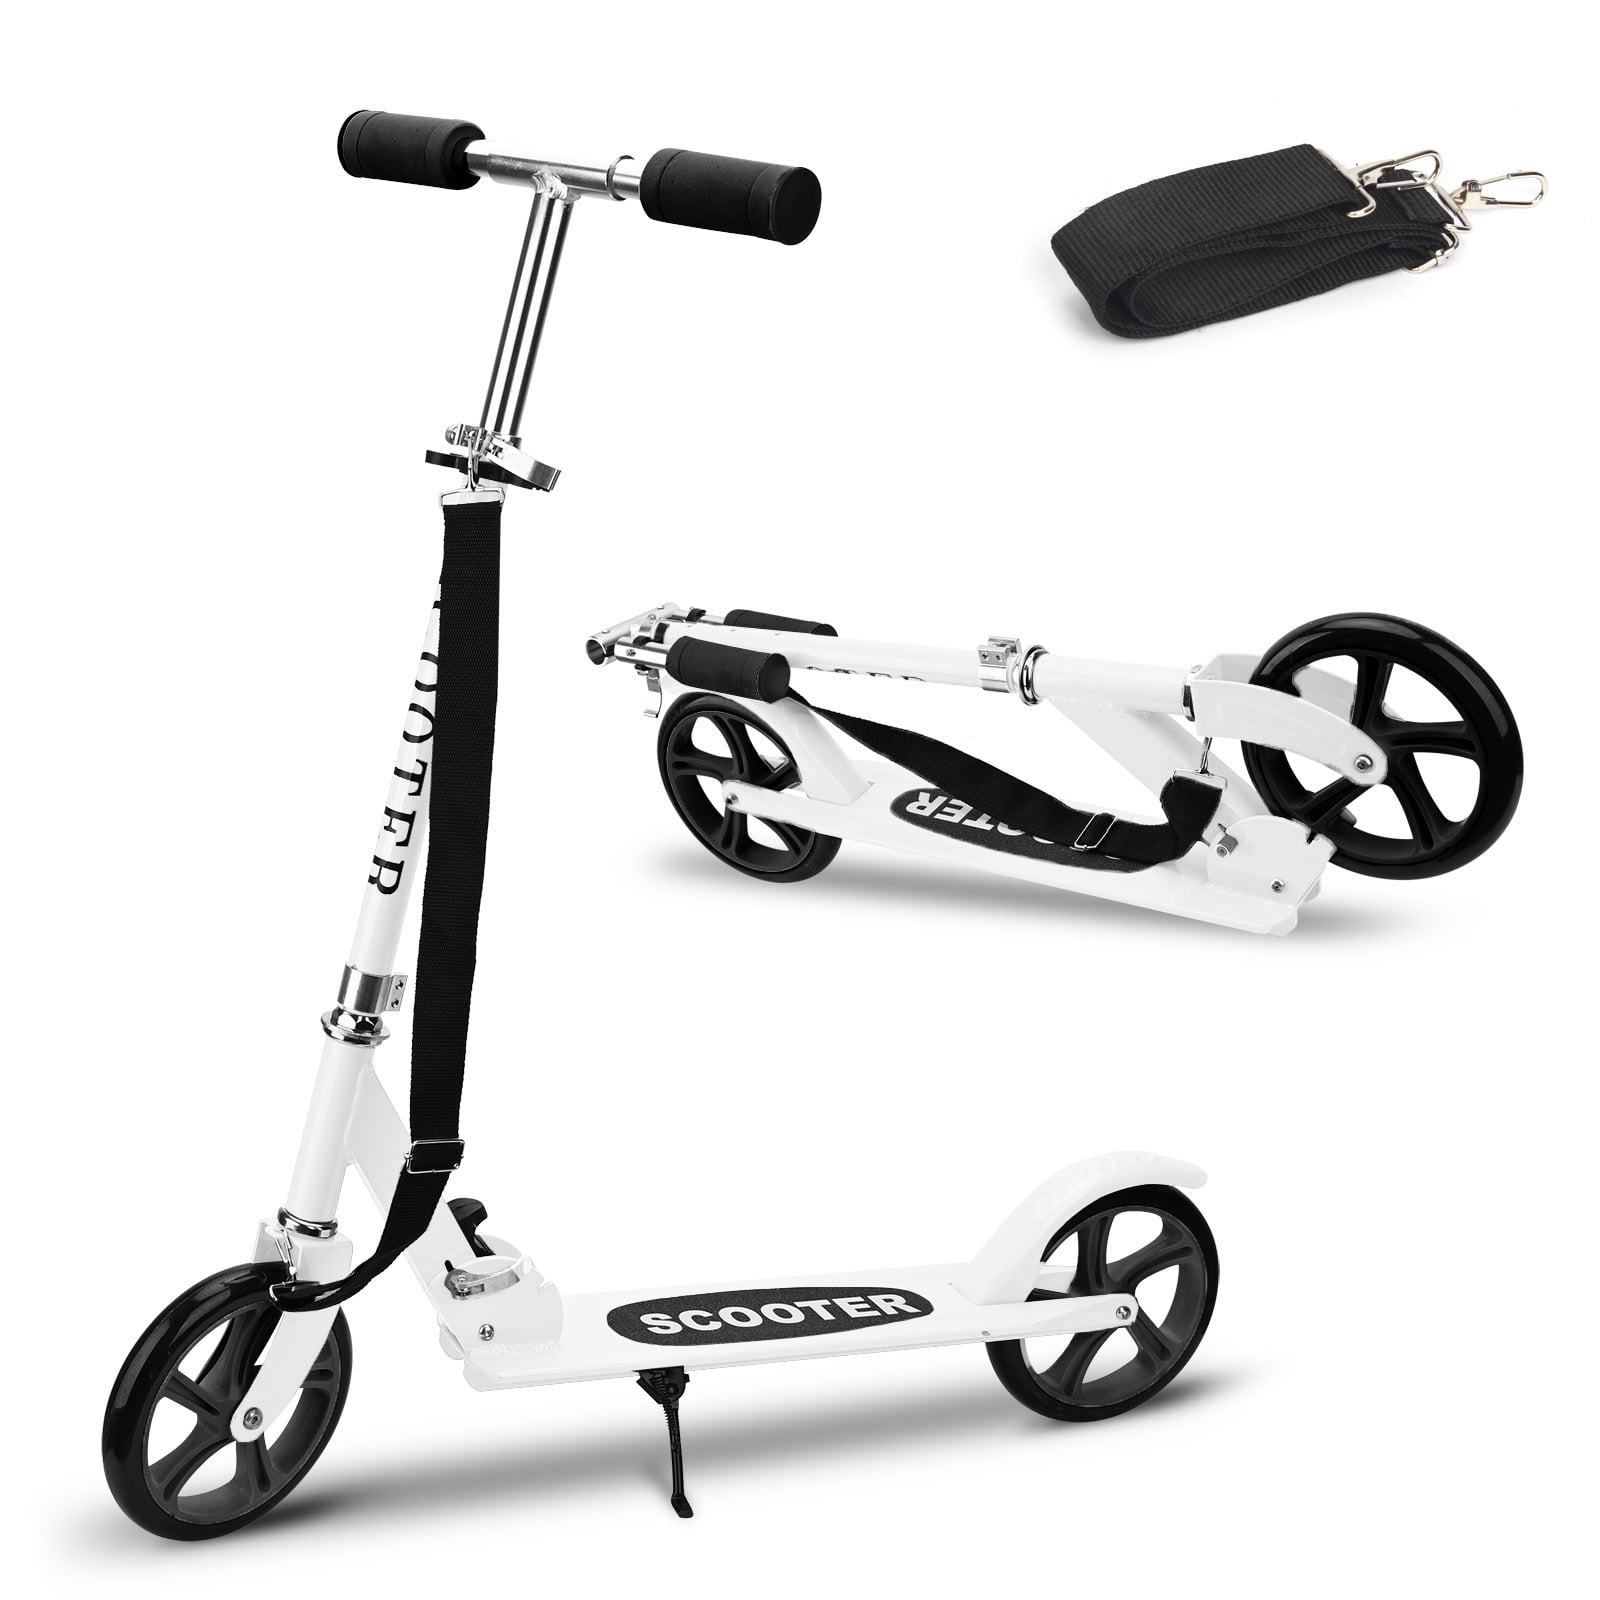 Details about   Folding Aluminium Adjustable Kick Scooter w/ Shoulder Strap for Kids Teens White 